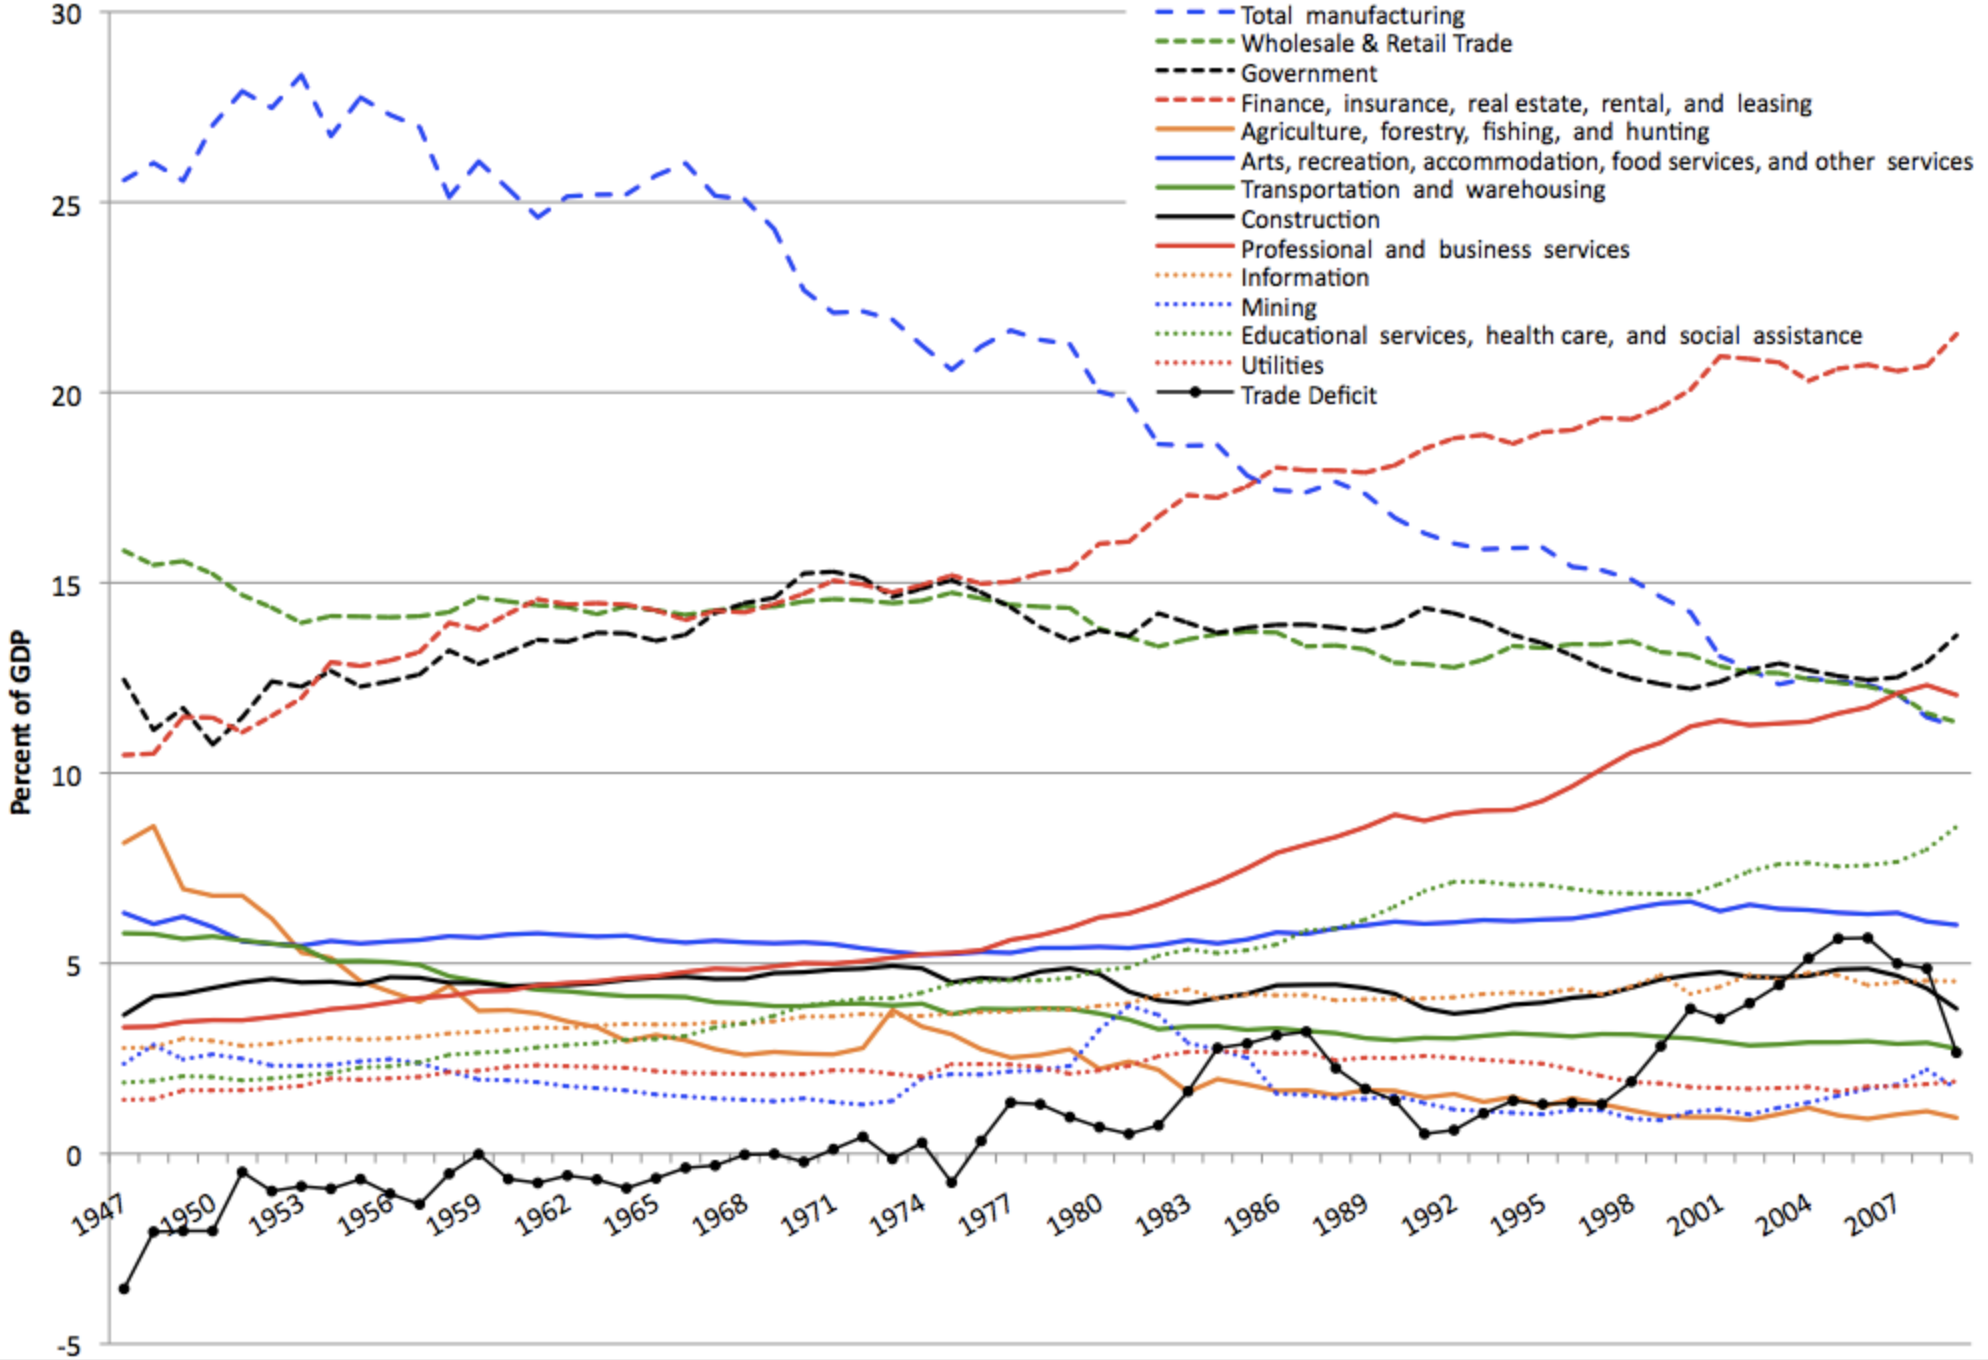 Sectors As a % of GDP Over Time, U.S. (Finance And Over Financialization)